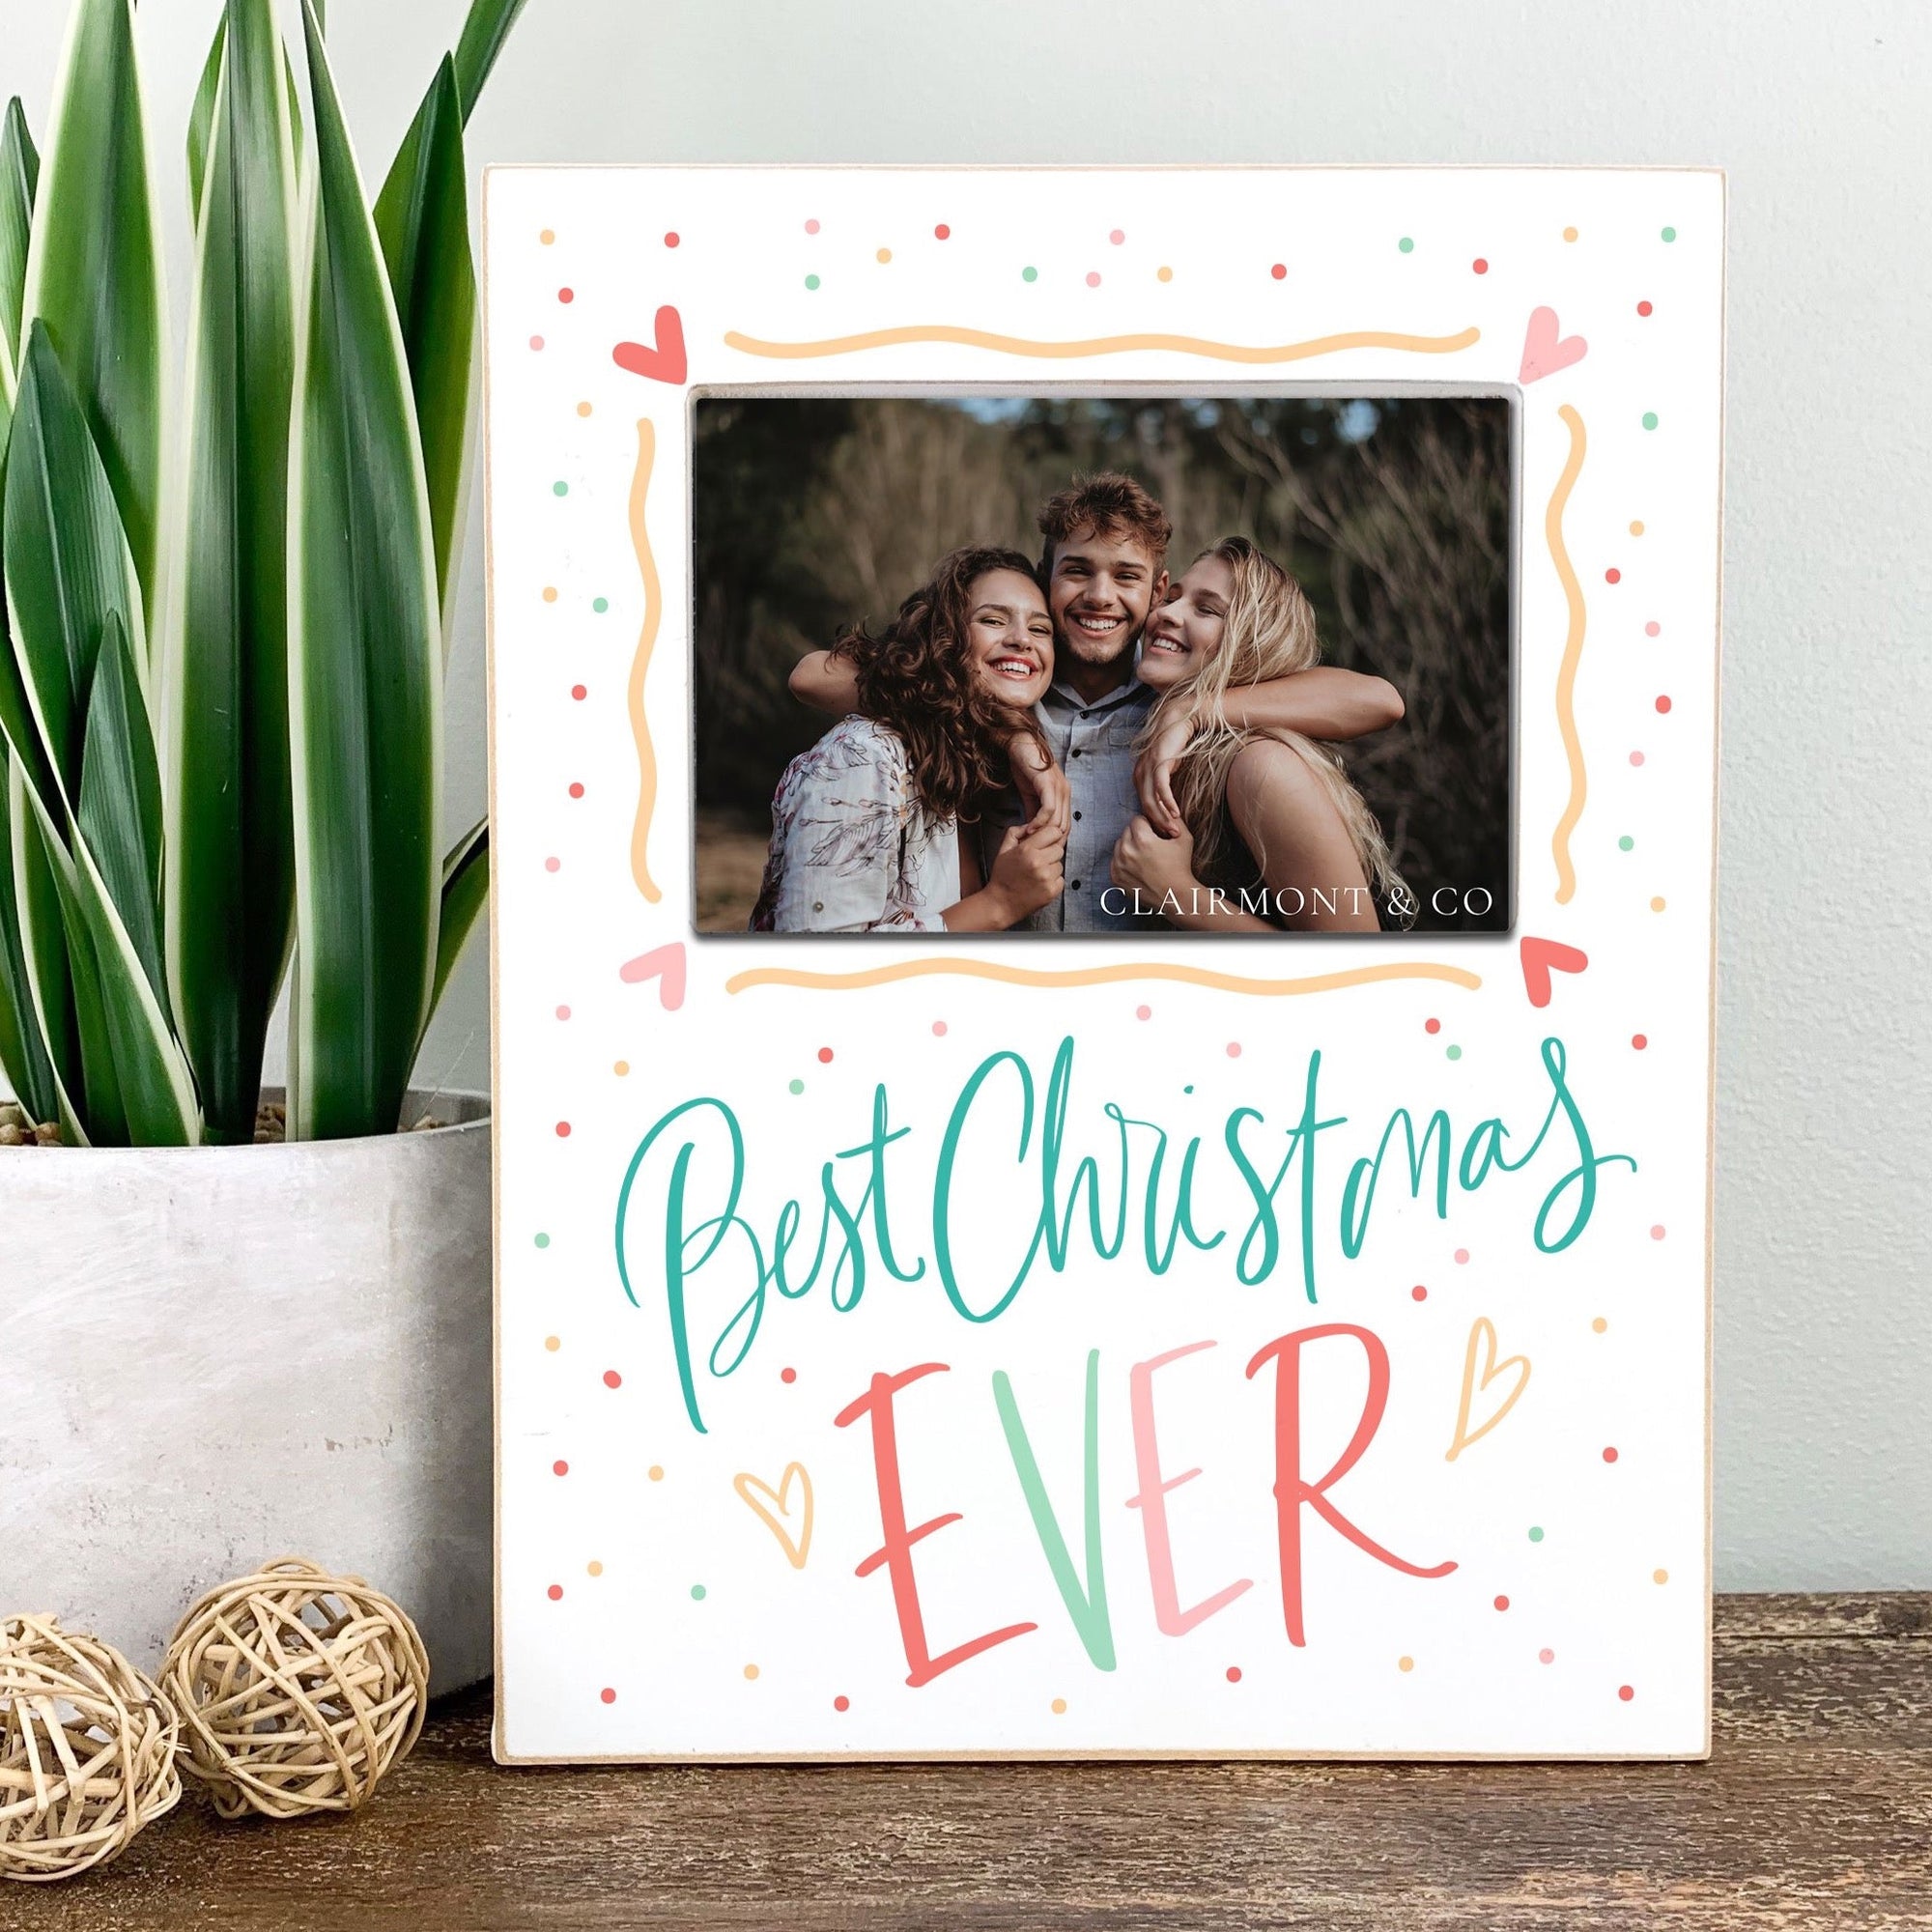 https://cdn.shopify.com/s/files/1/0493/4044/8932/products/picture-frame-best-christmas-ever-4x6-photo-frame-wood-photo-frame-the-warehouse-studio-823086_2000x.jpg?v=1654626054